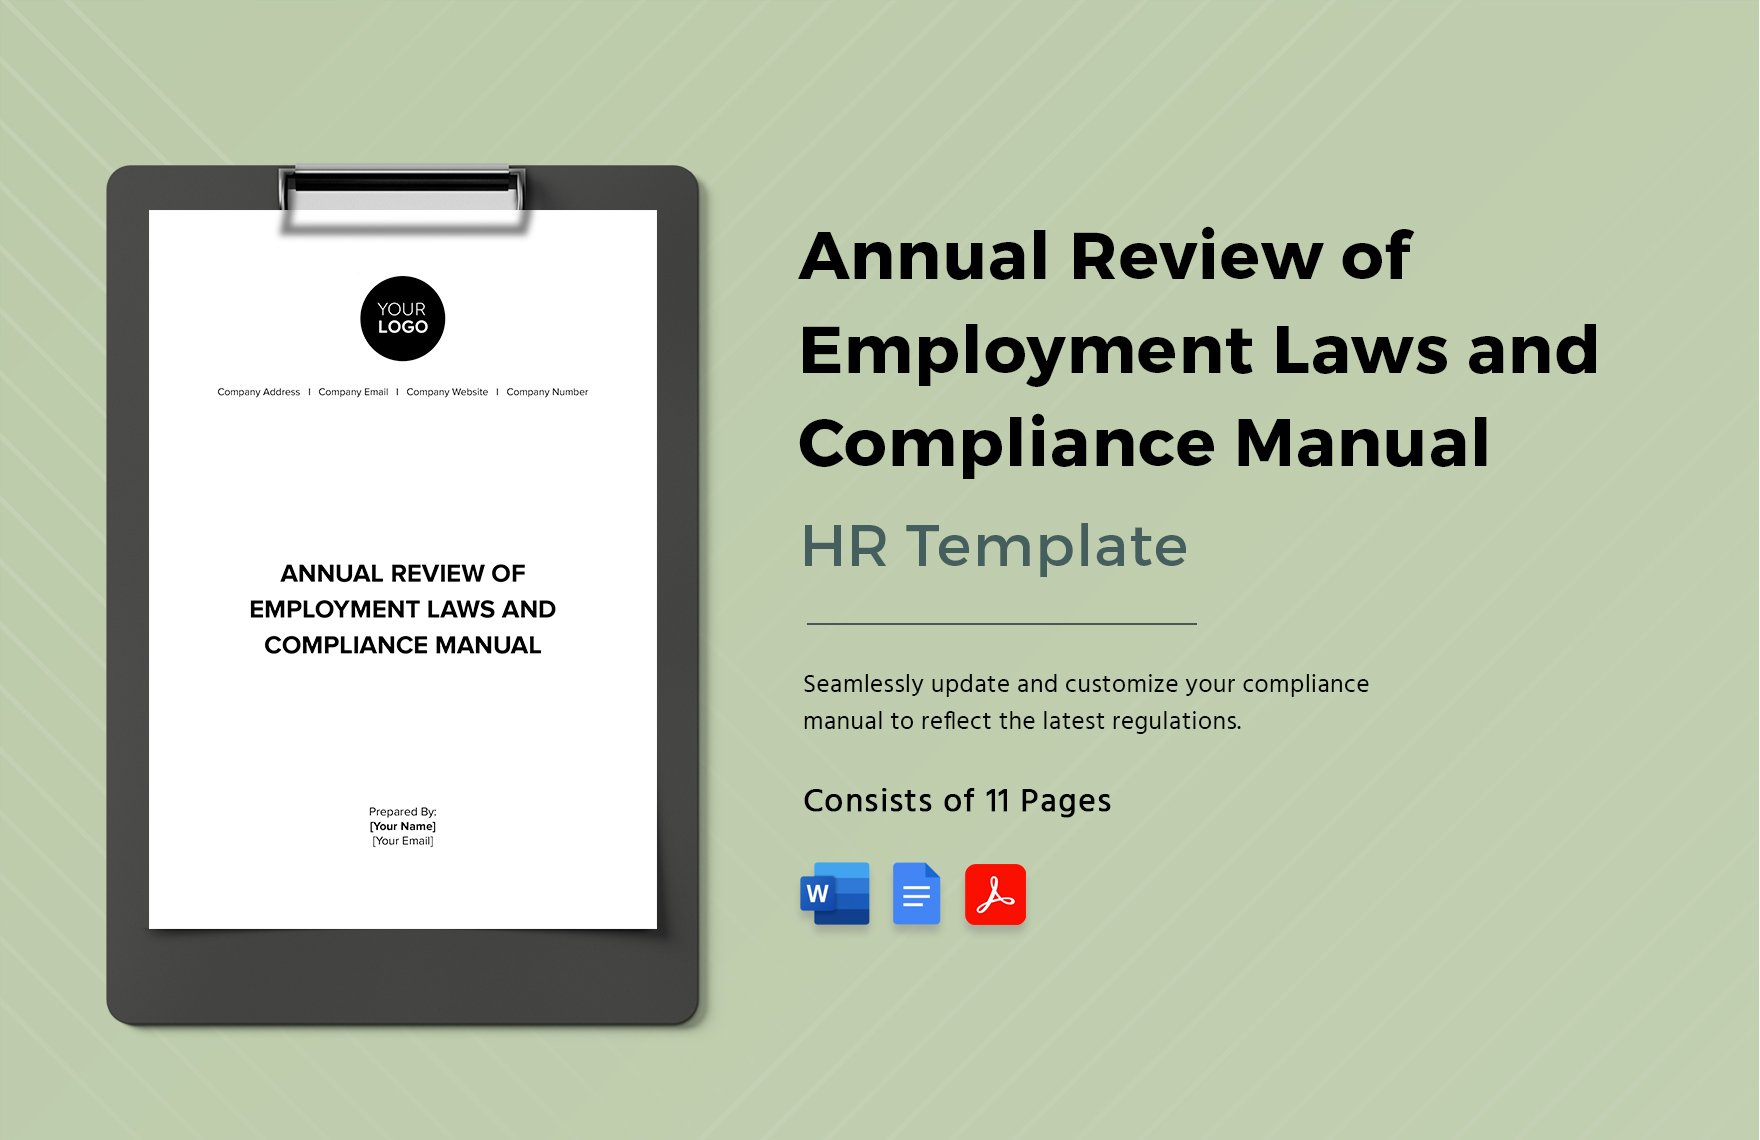 Annual Review of Employment Laws and Compliance Manual HR Template